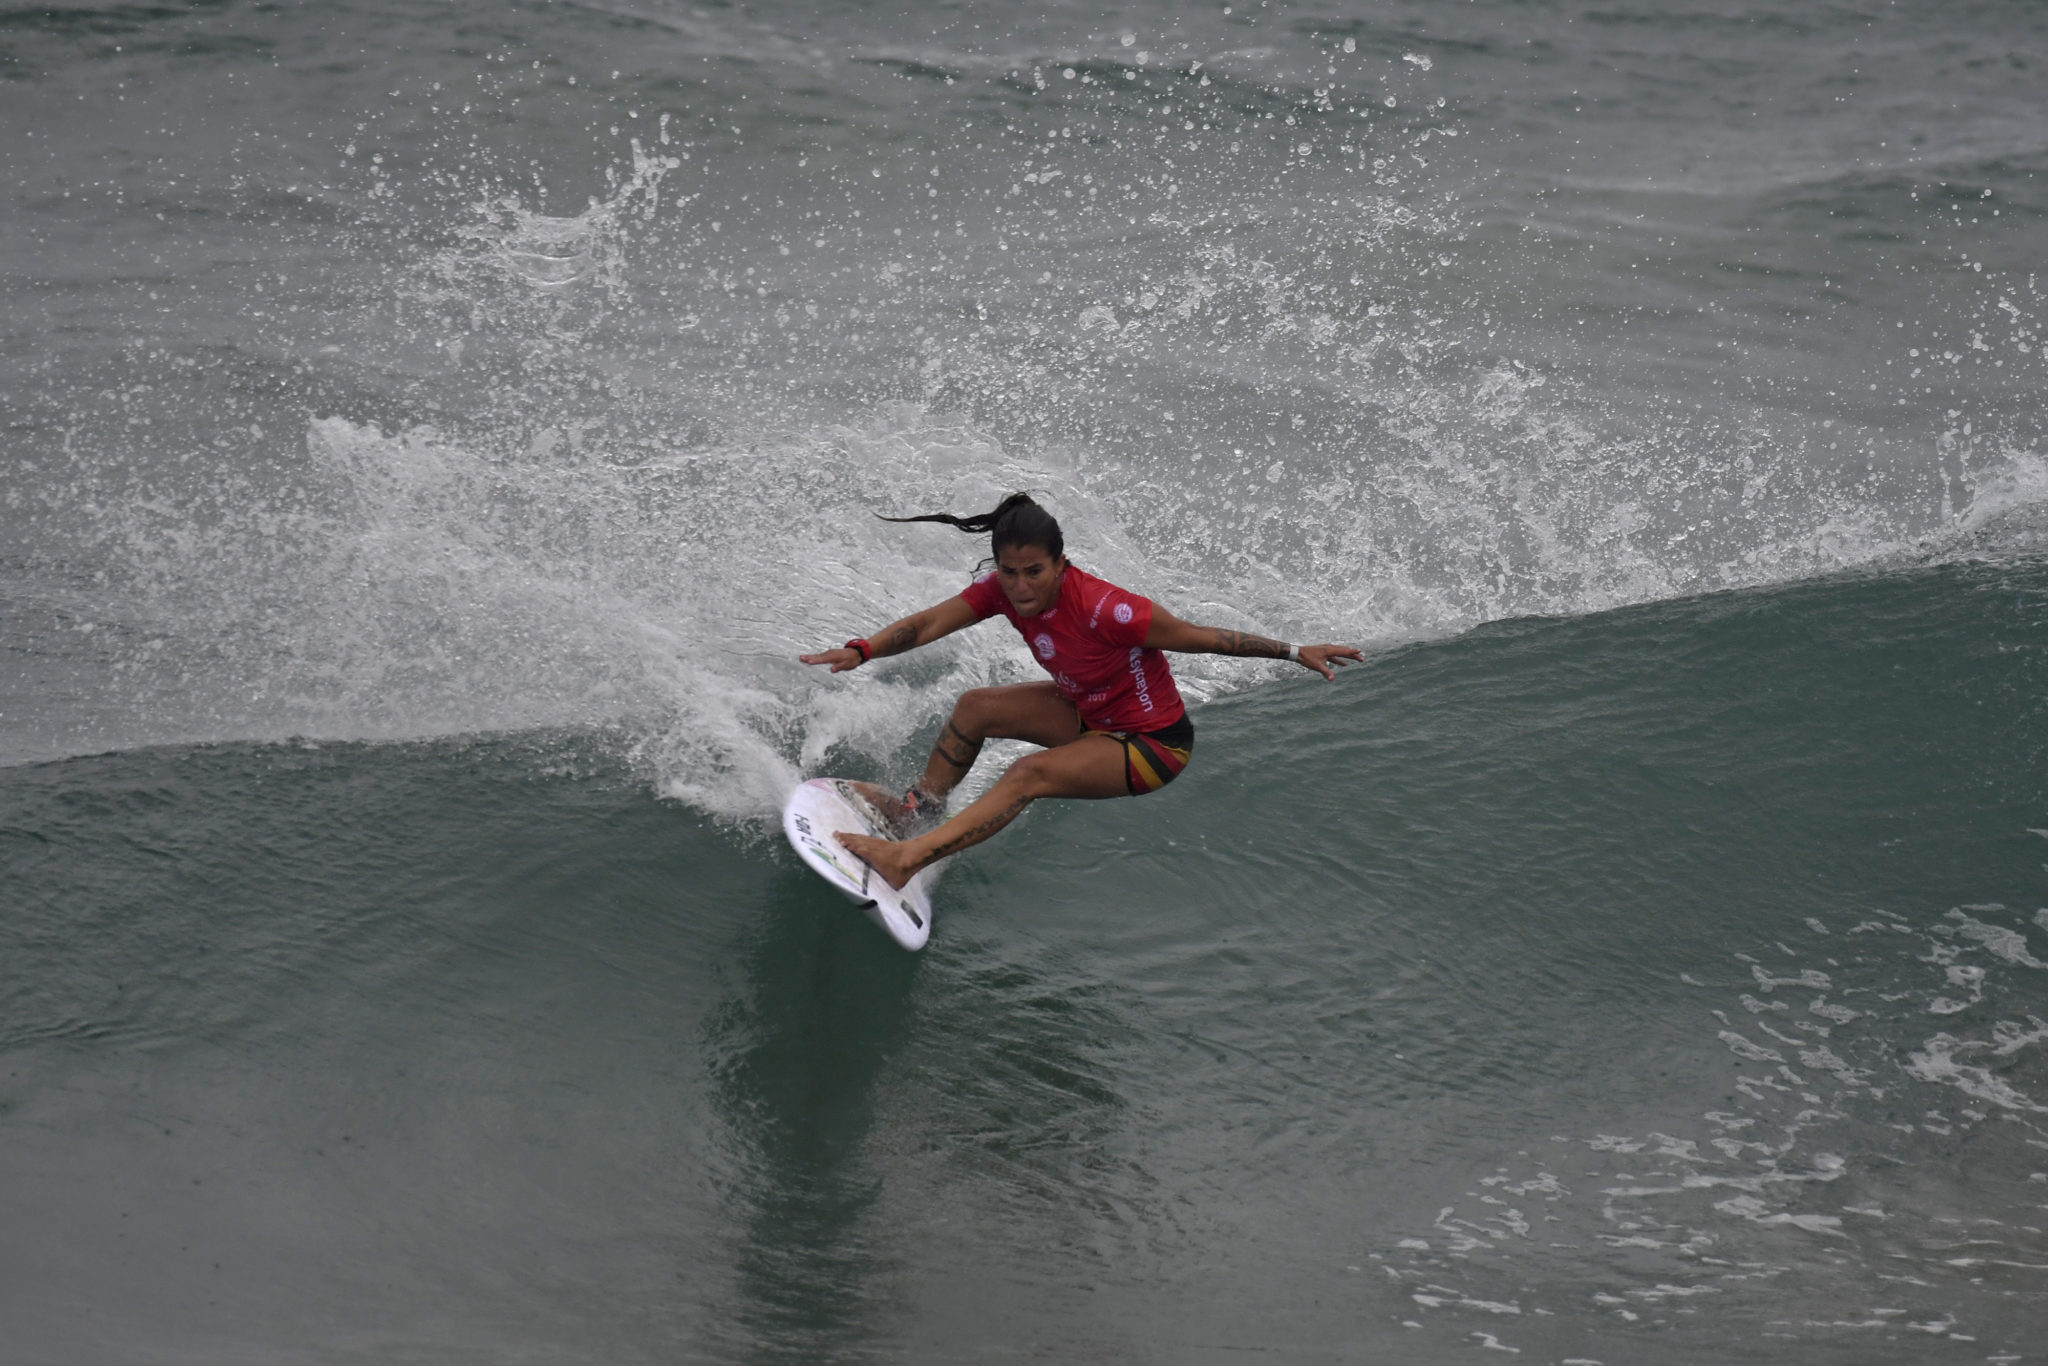 Silvana Lima placed second in Heat 3 of Round 3 at the Girls Make Your Call Women's Pro.